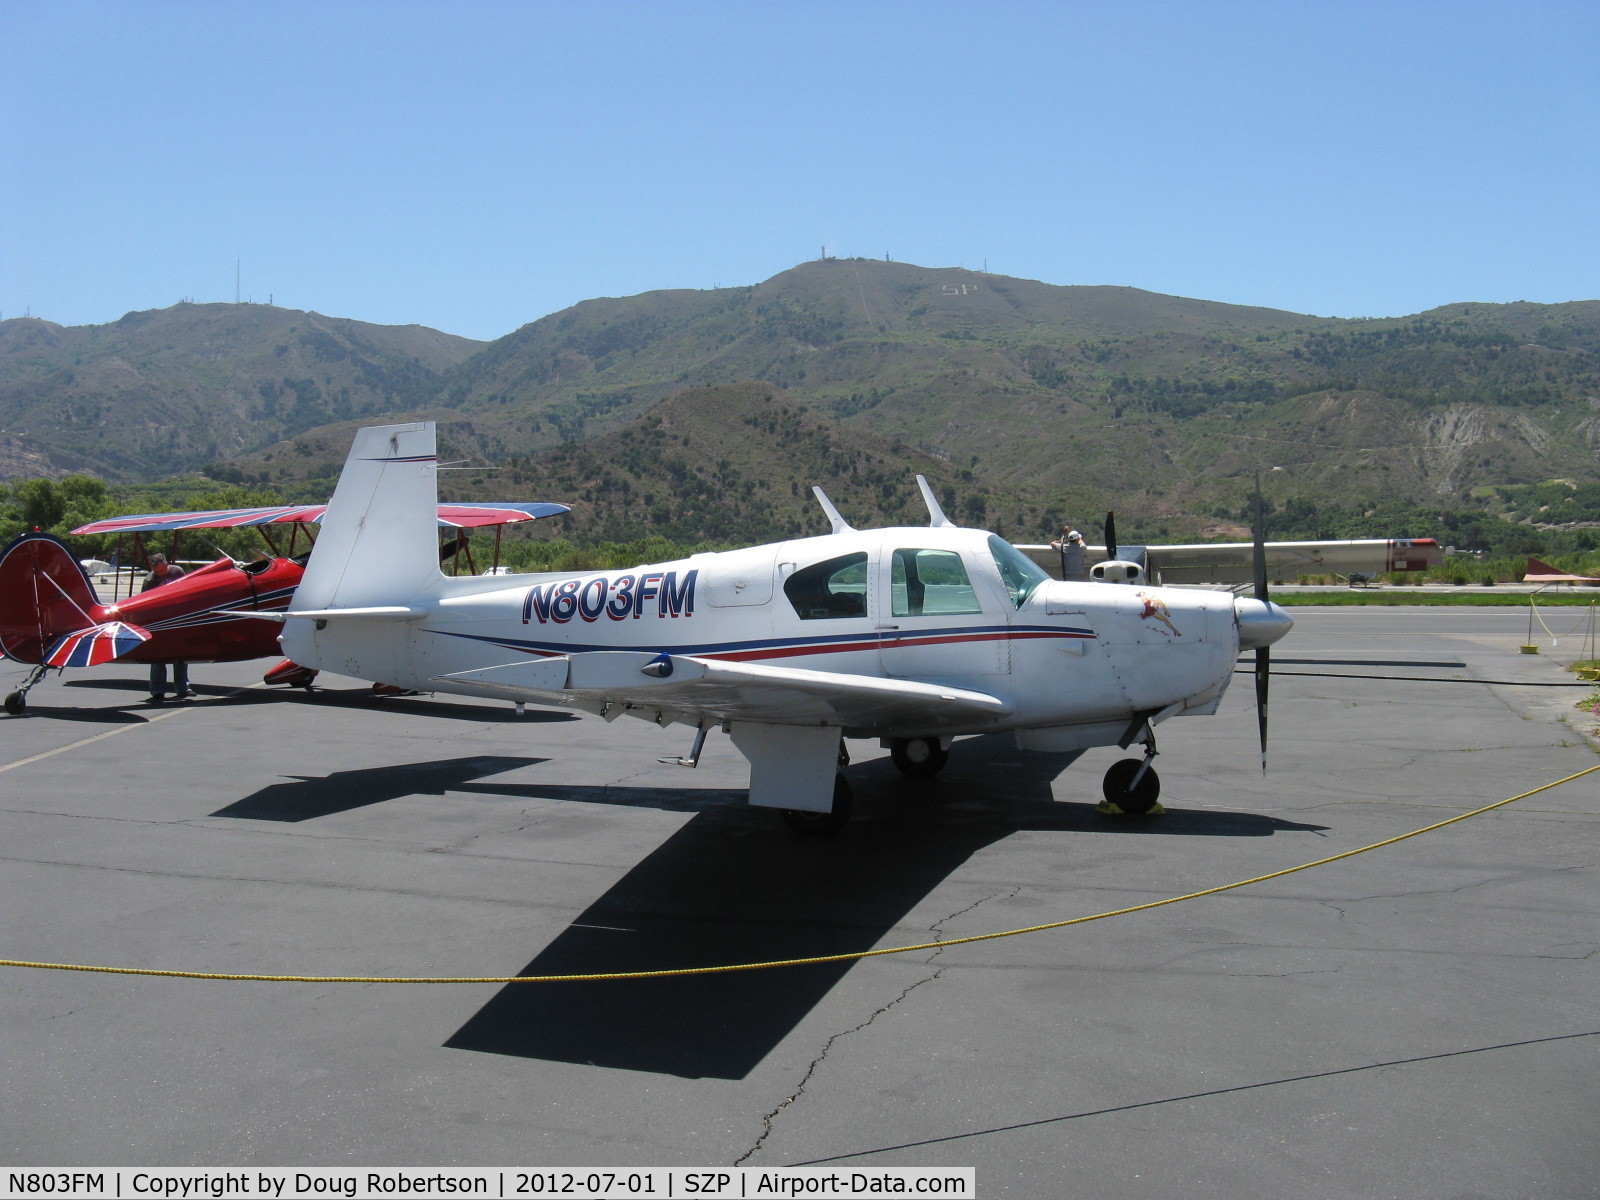 N803FM, 1961 Mooney M20B Mark 21 C/N 1803, 1961 Mooney M20B Mk.21, Lycoming O-360-A1D 180 Hp, this engine with impulse-coupled mags. B model first M20 with metal wings, tail; so all-metal. M20B production numbered 223 aircraft.